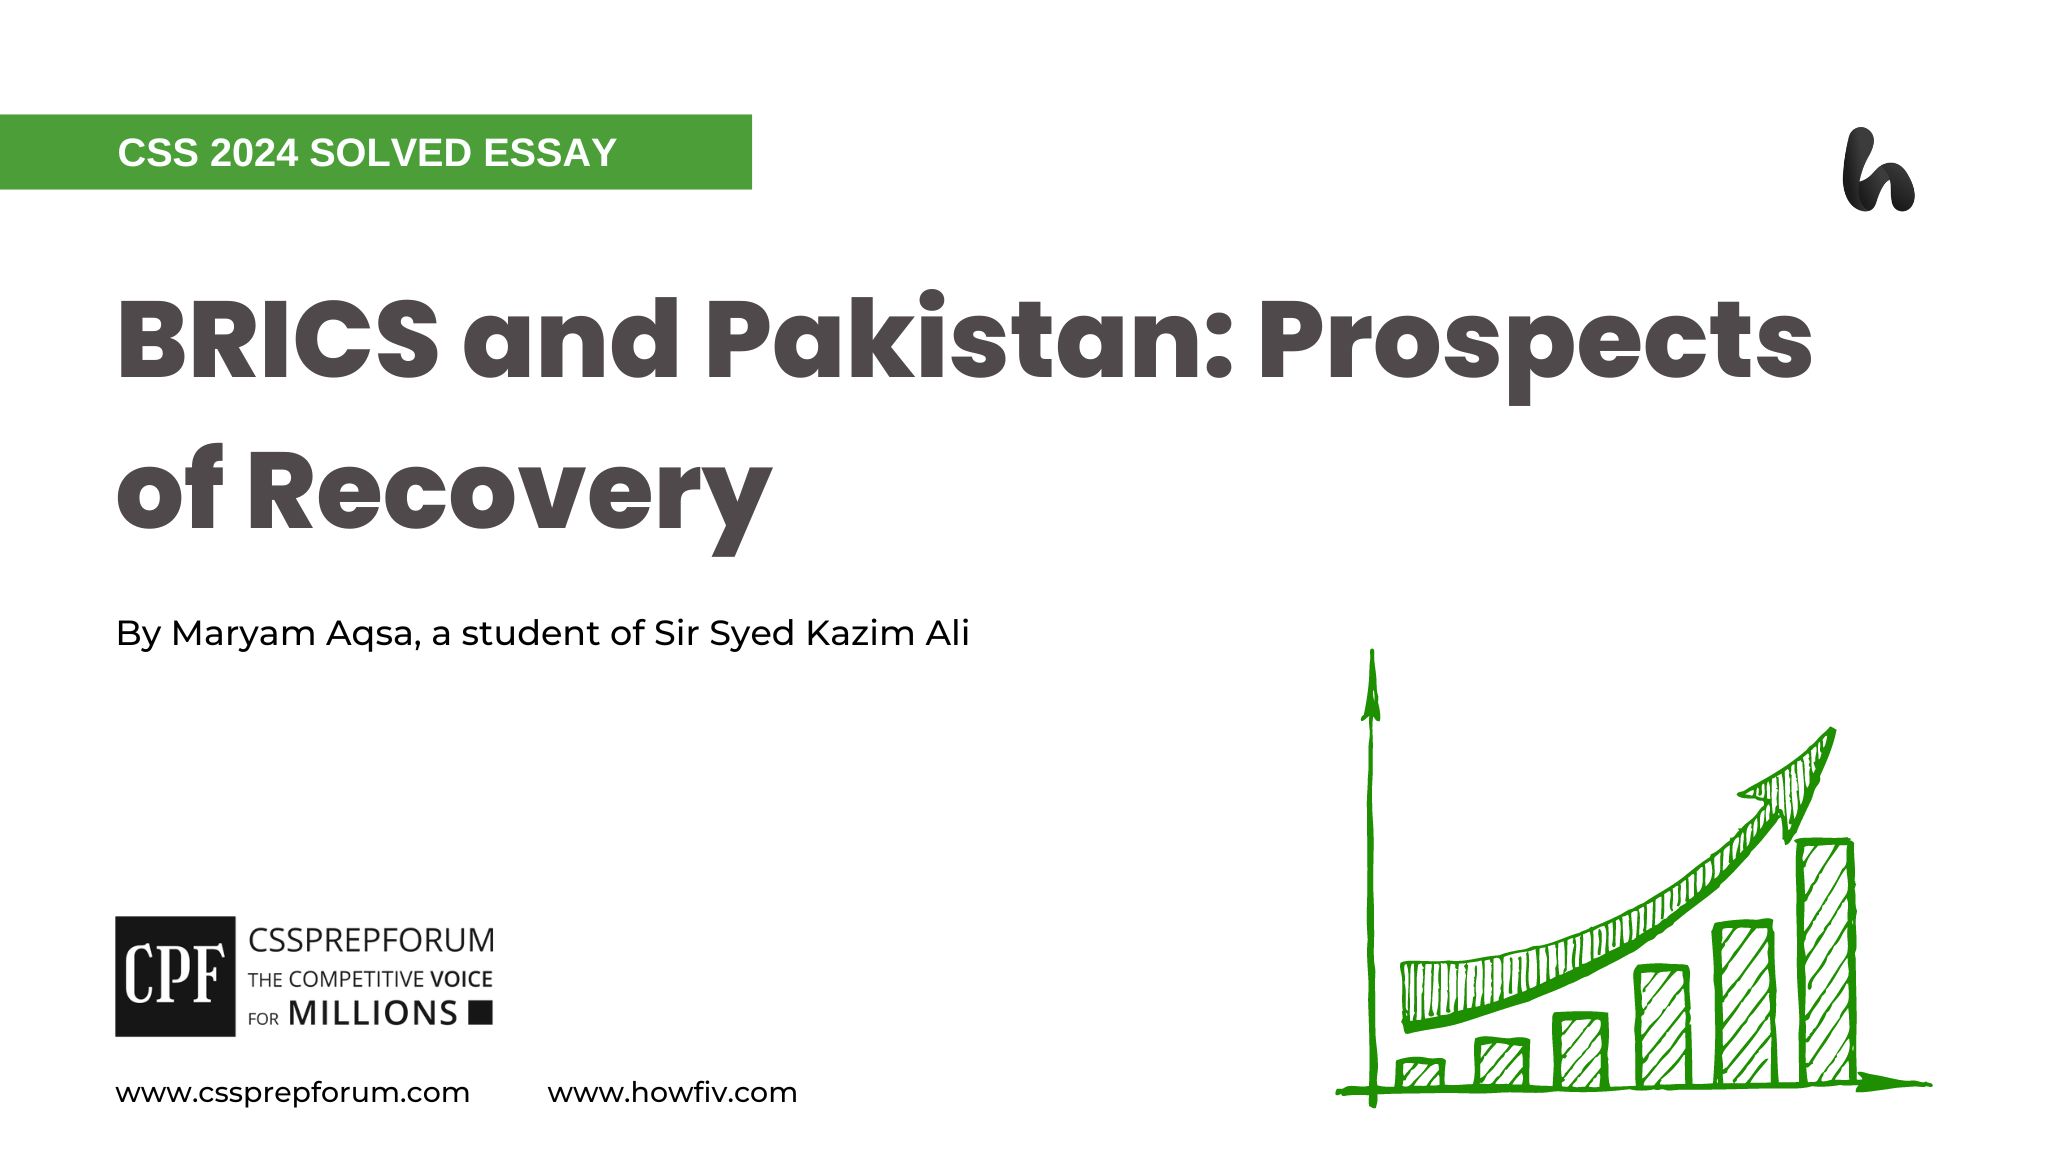 BRICS and Pakistan Prospects of Recovery by Maryam Aqsa